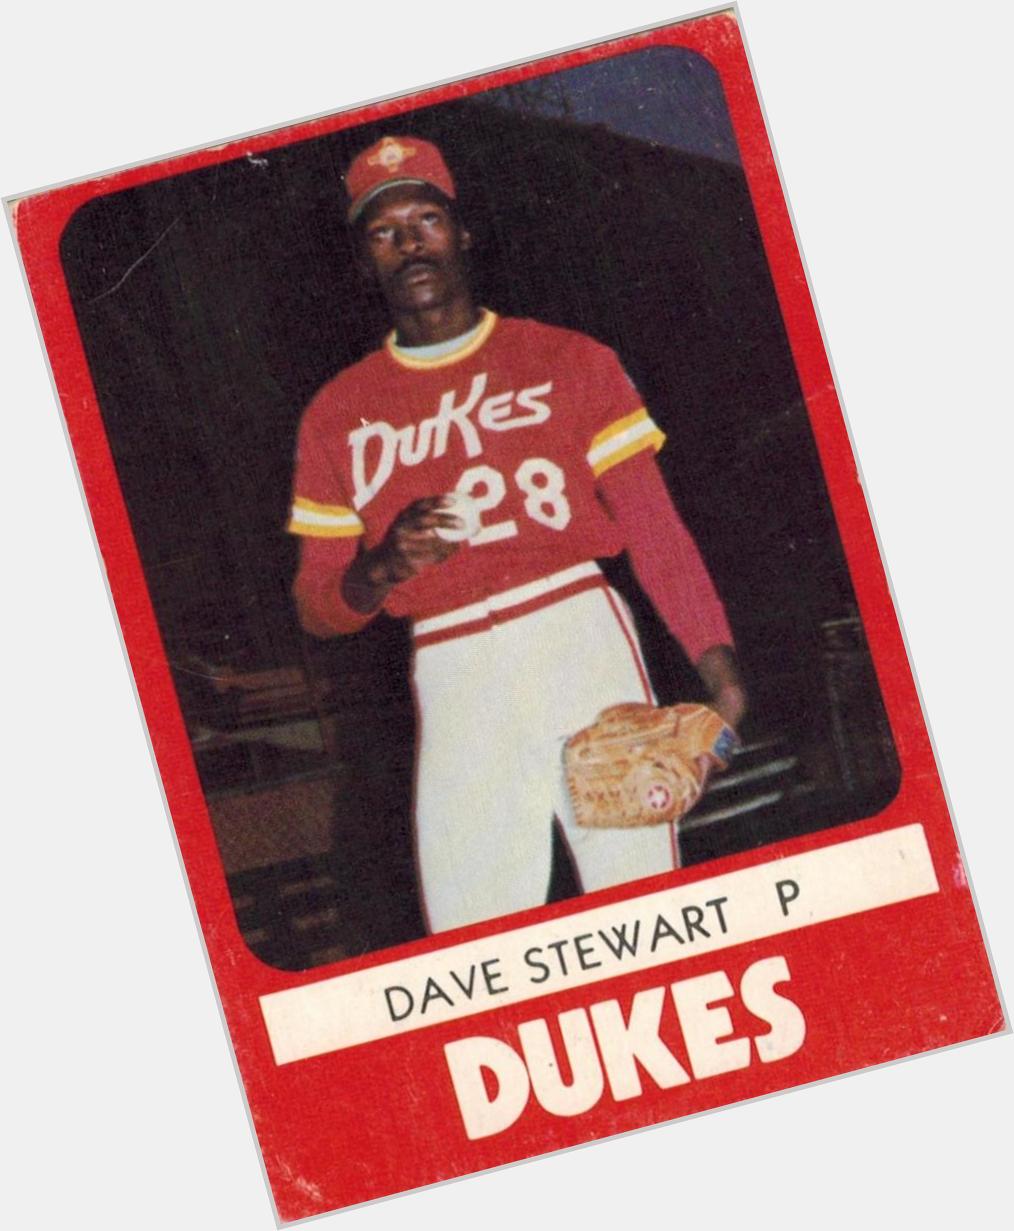 Happy birthday to Dave Stewart! (And to me, too!) 